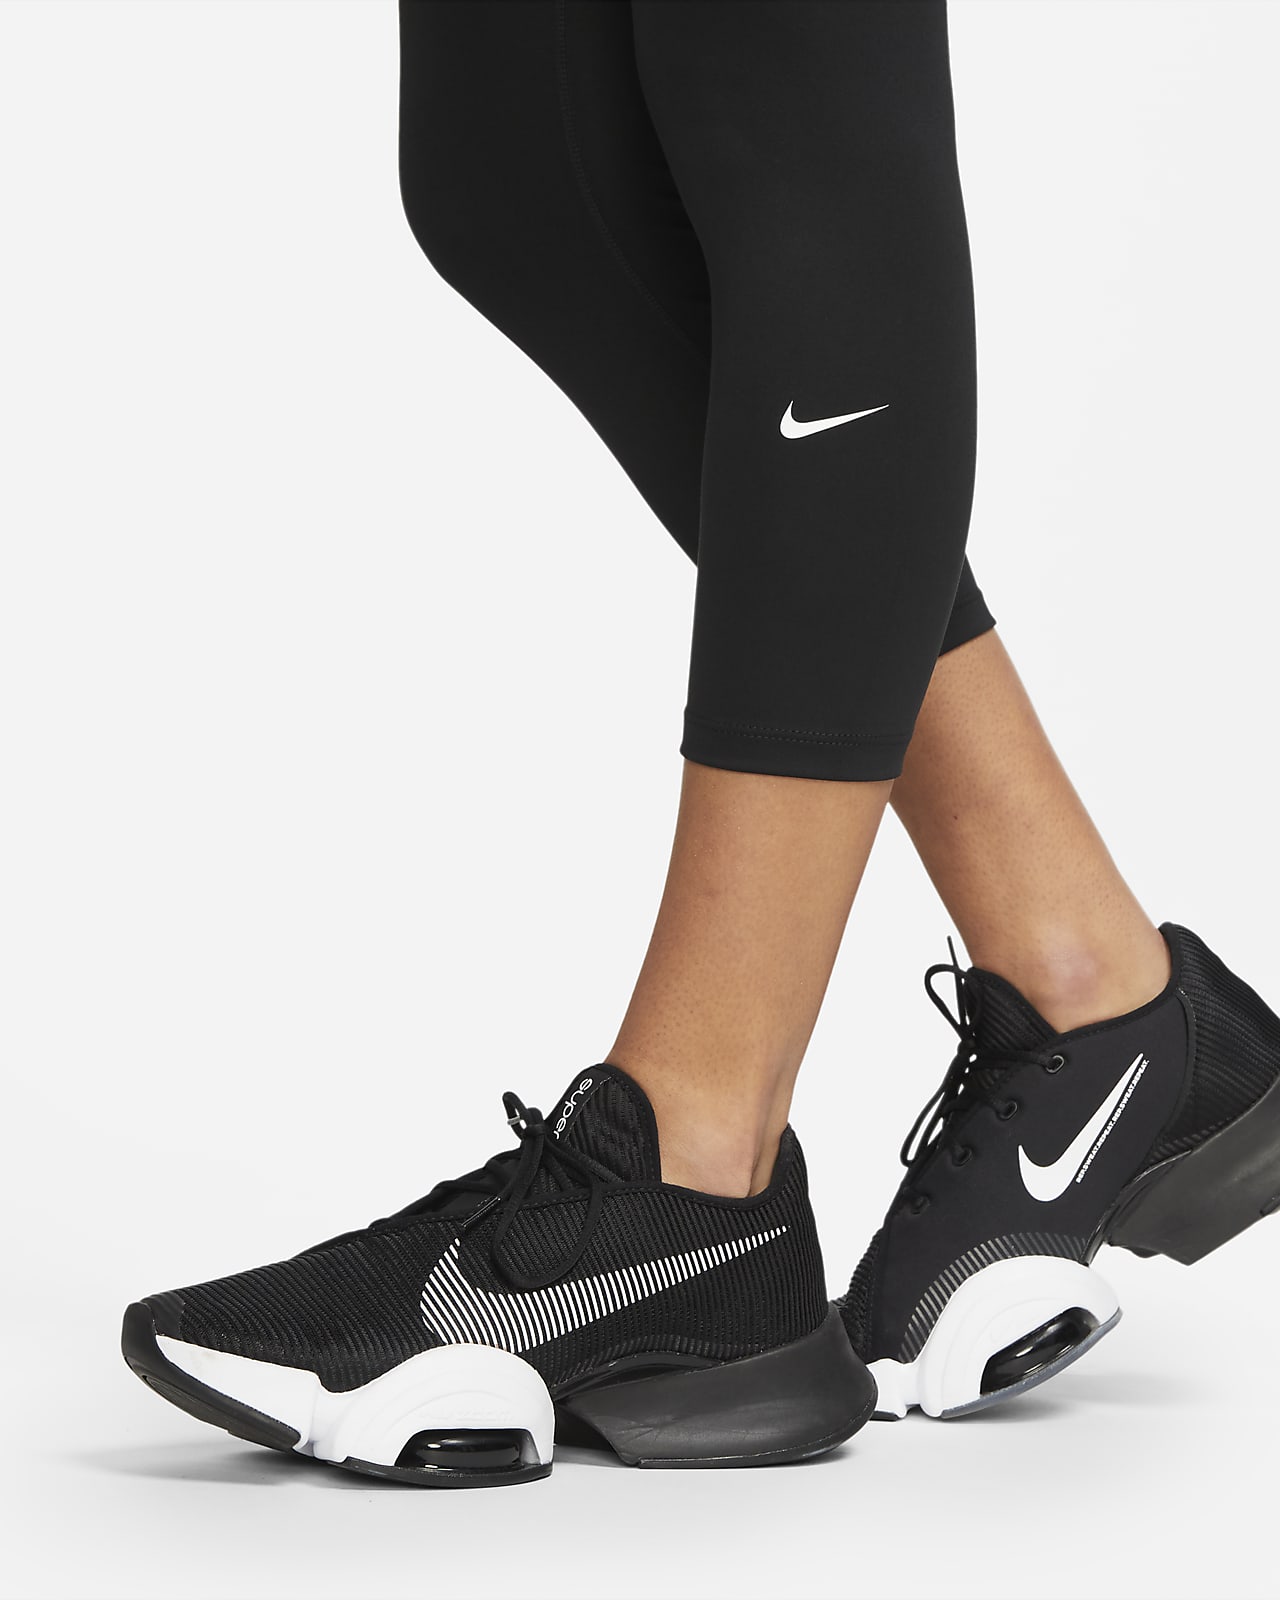 Legging Nike One High-Rise Cropped pour Femme